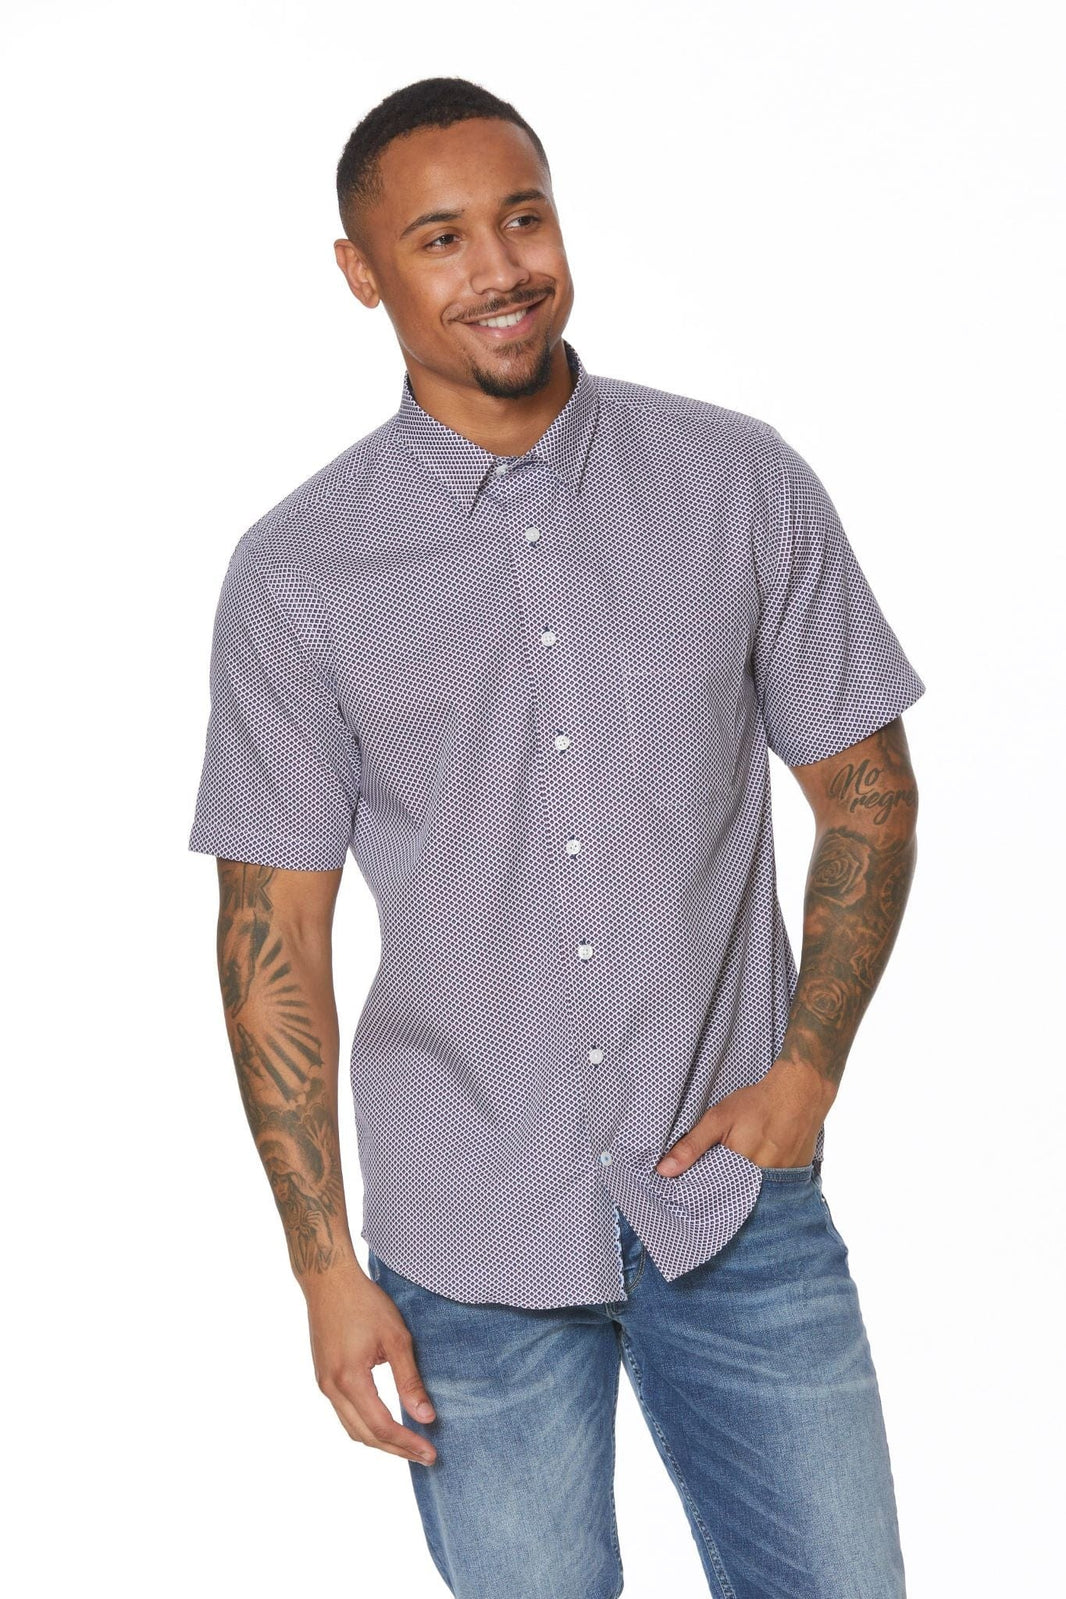 Stylish Summer Shirts: The Abbey Short Sleeve Collection